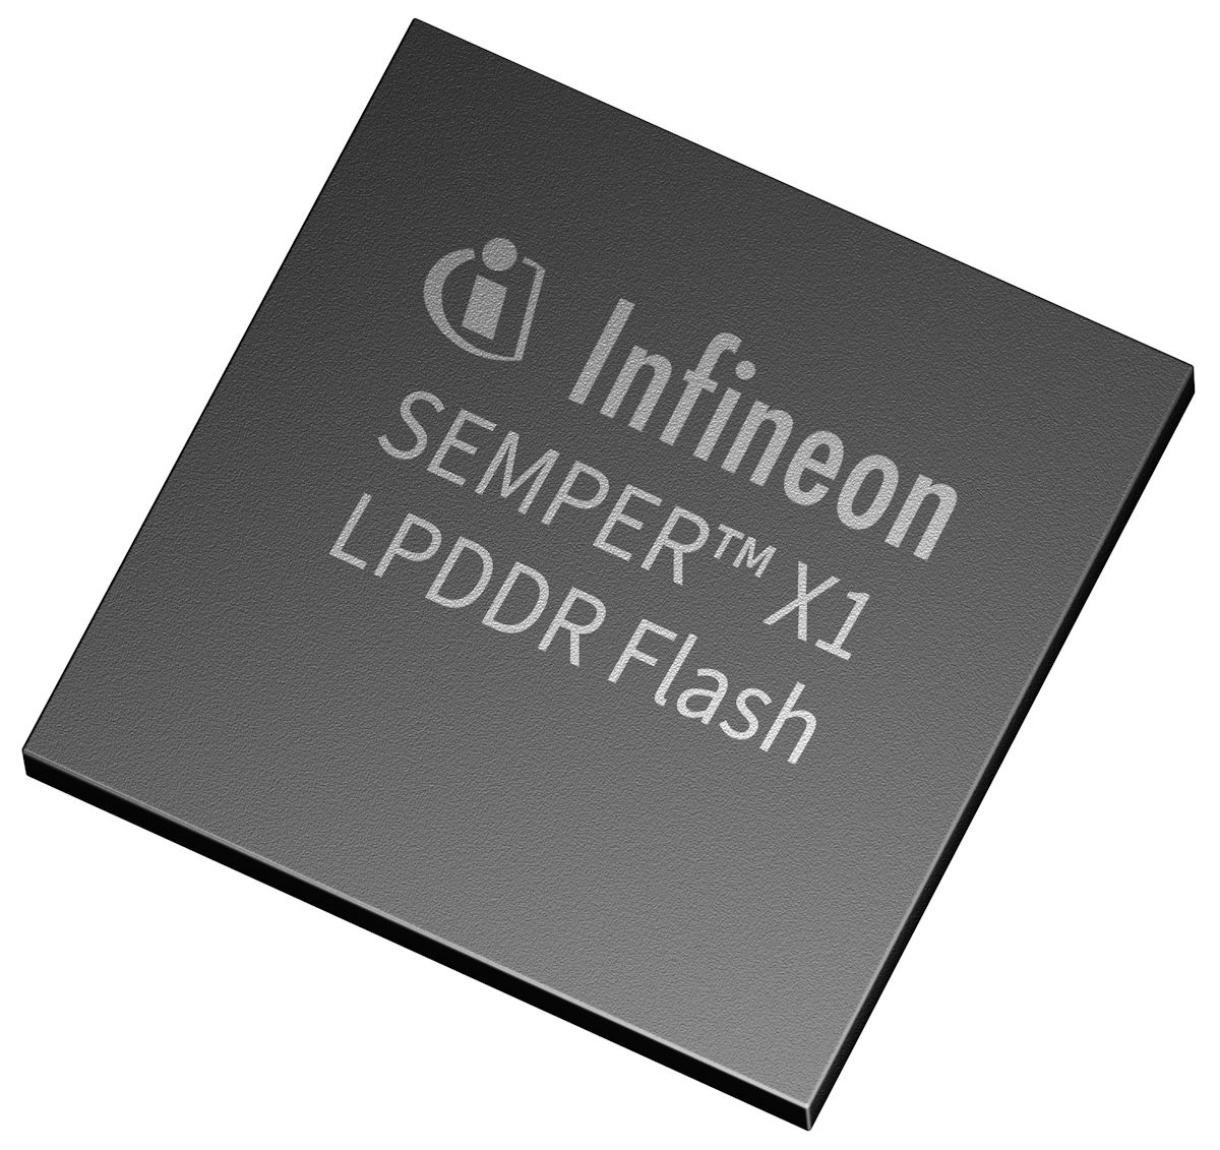 Infineon Enables Next-Generation Automotive E/E Architectures with Industry's First LPDDR Flash Memory